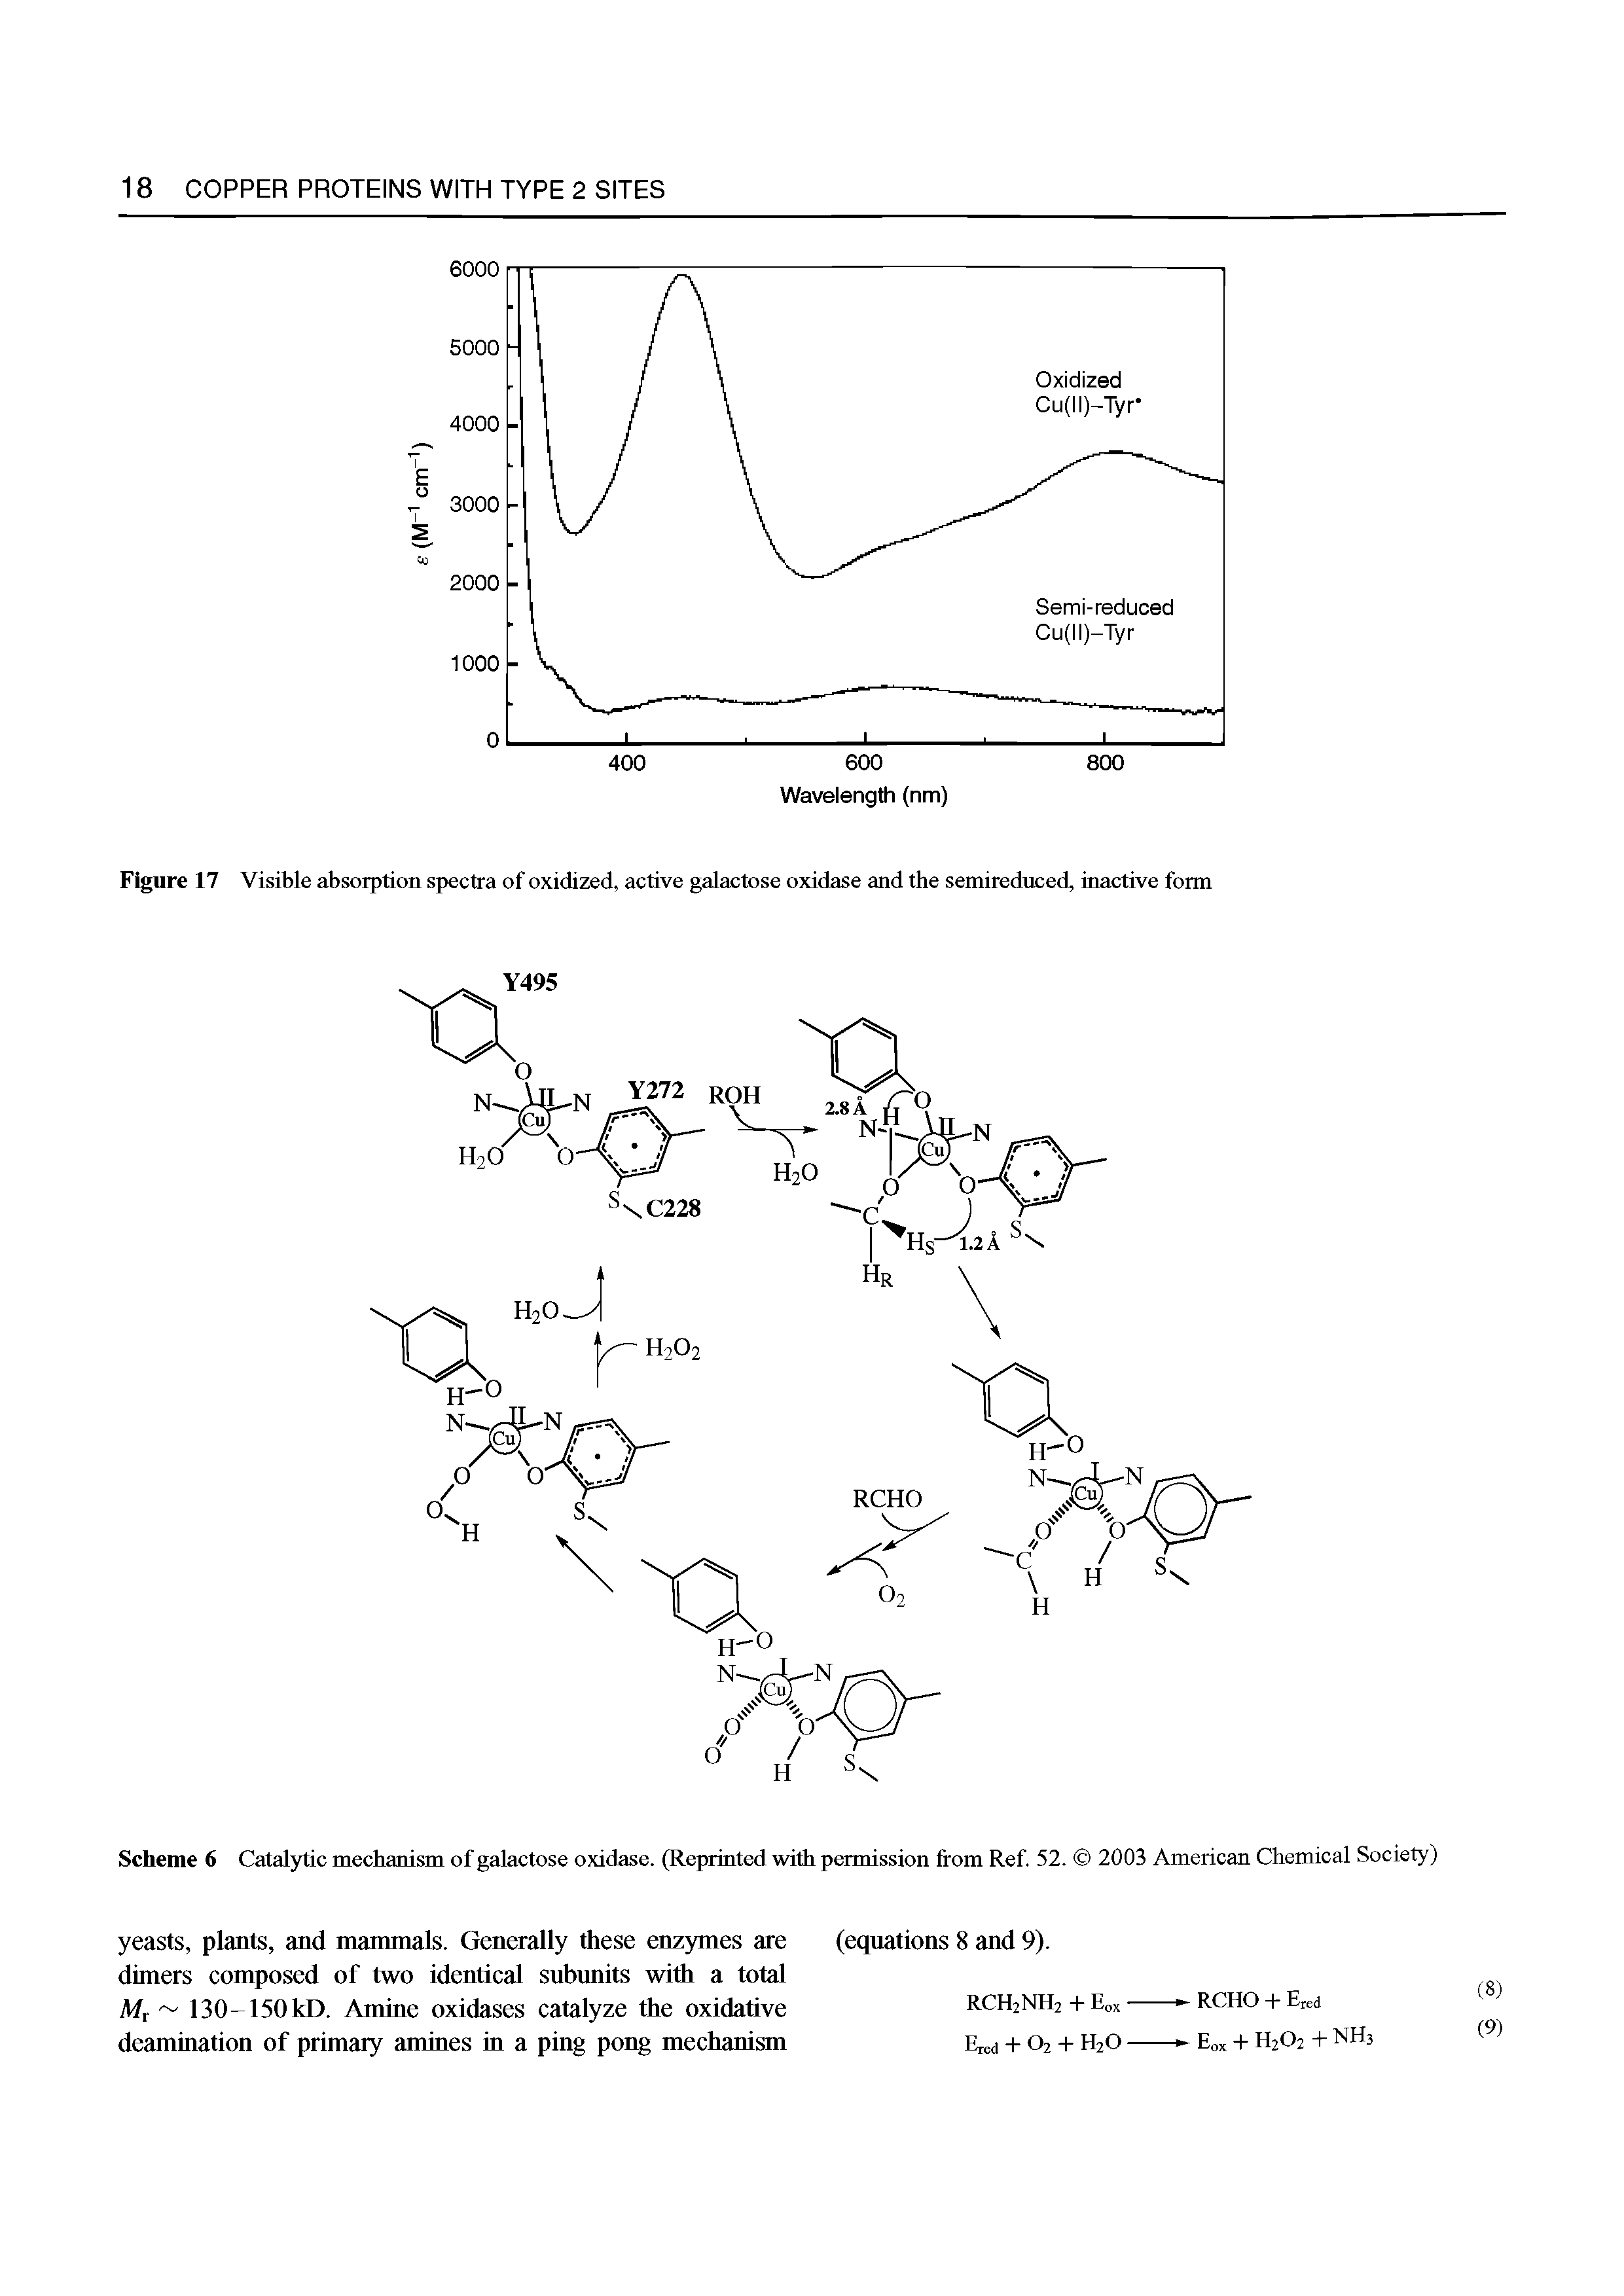 Scheme 6 Catal)ftic mechanism of galactose oxidase. (Reprinted with permission from Ref 52. 2003 American Chemical Society)...